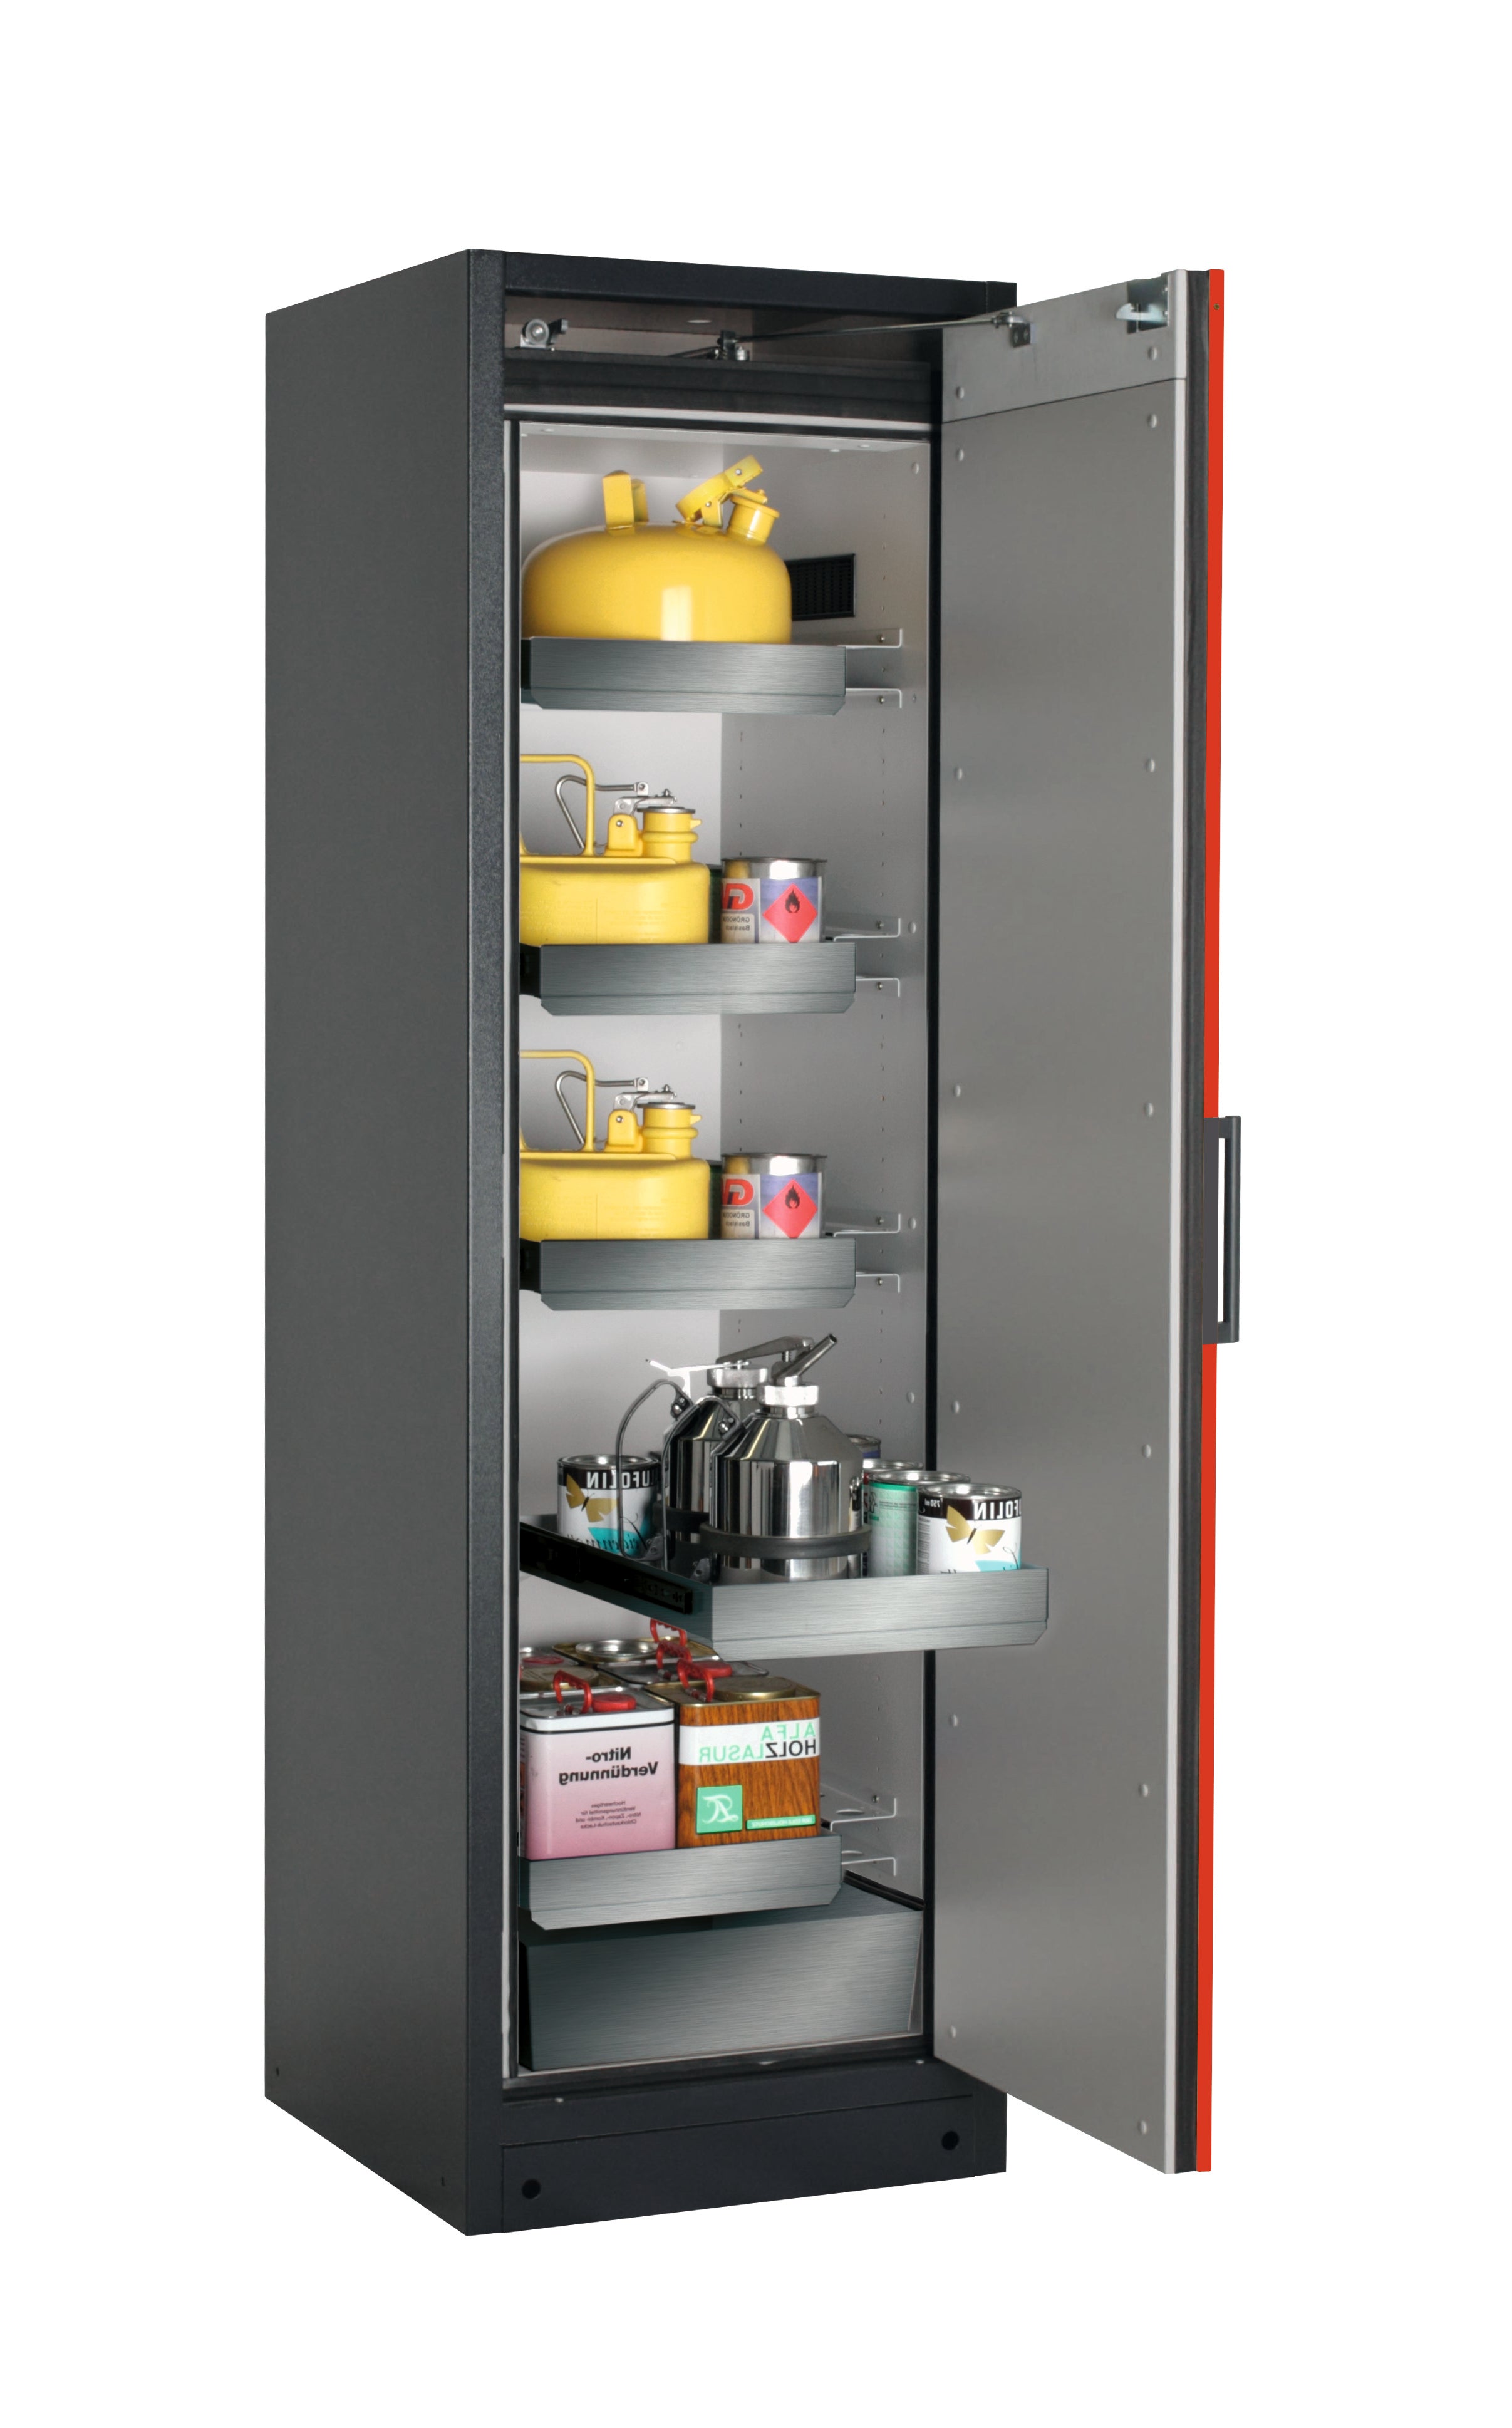 Type 90 safety storage cabinet Q-CLASSIC-90 model Q90.195.060.R in traffic red RAL 3020 with 4x drawer (standard) (stainless steel 1.4301),